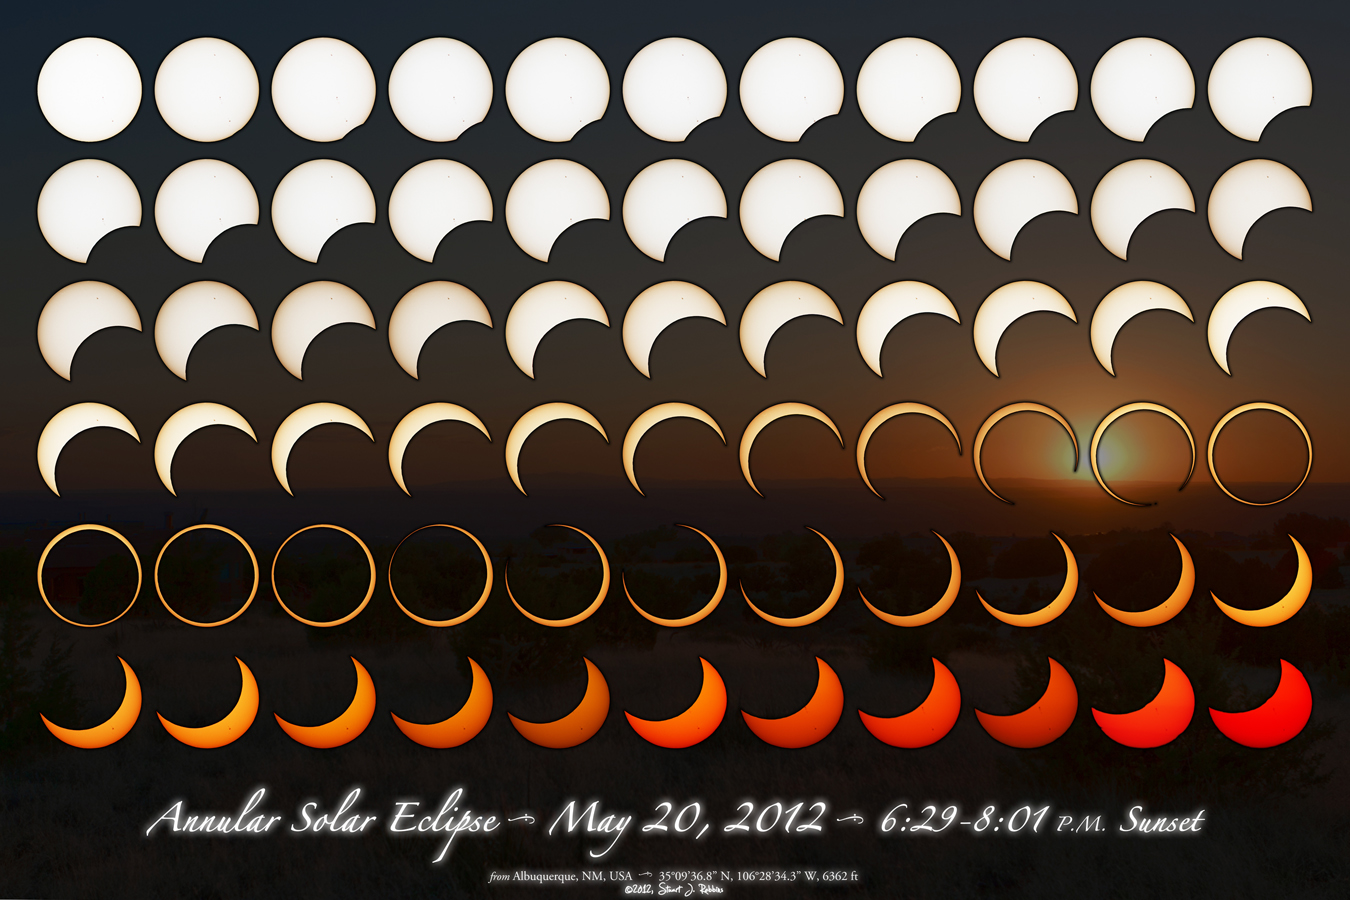 Solar Eclipse from May 20, 2012, from Albuquerque, NM The Photography